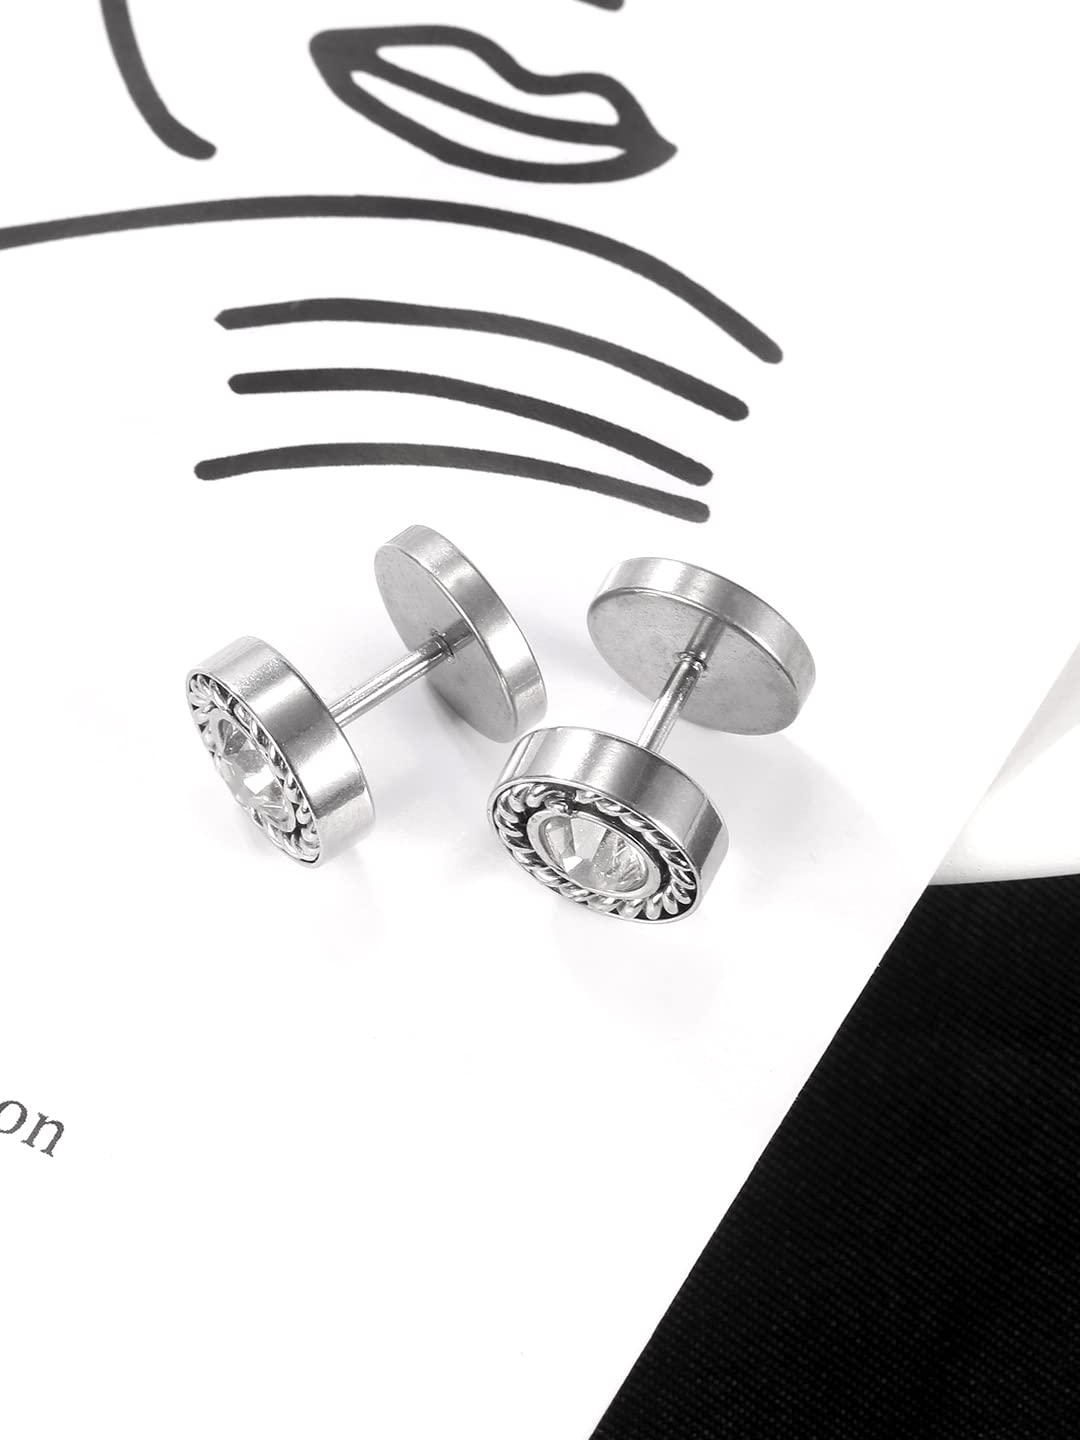 Stainless Steel Stud Earring Price in India - Buy Stainless Steel Stud  Earring online at Shopsy.in